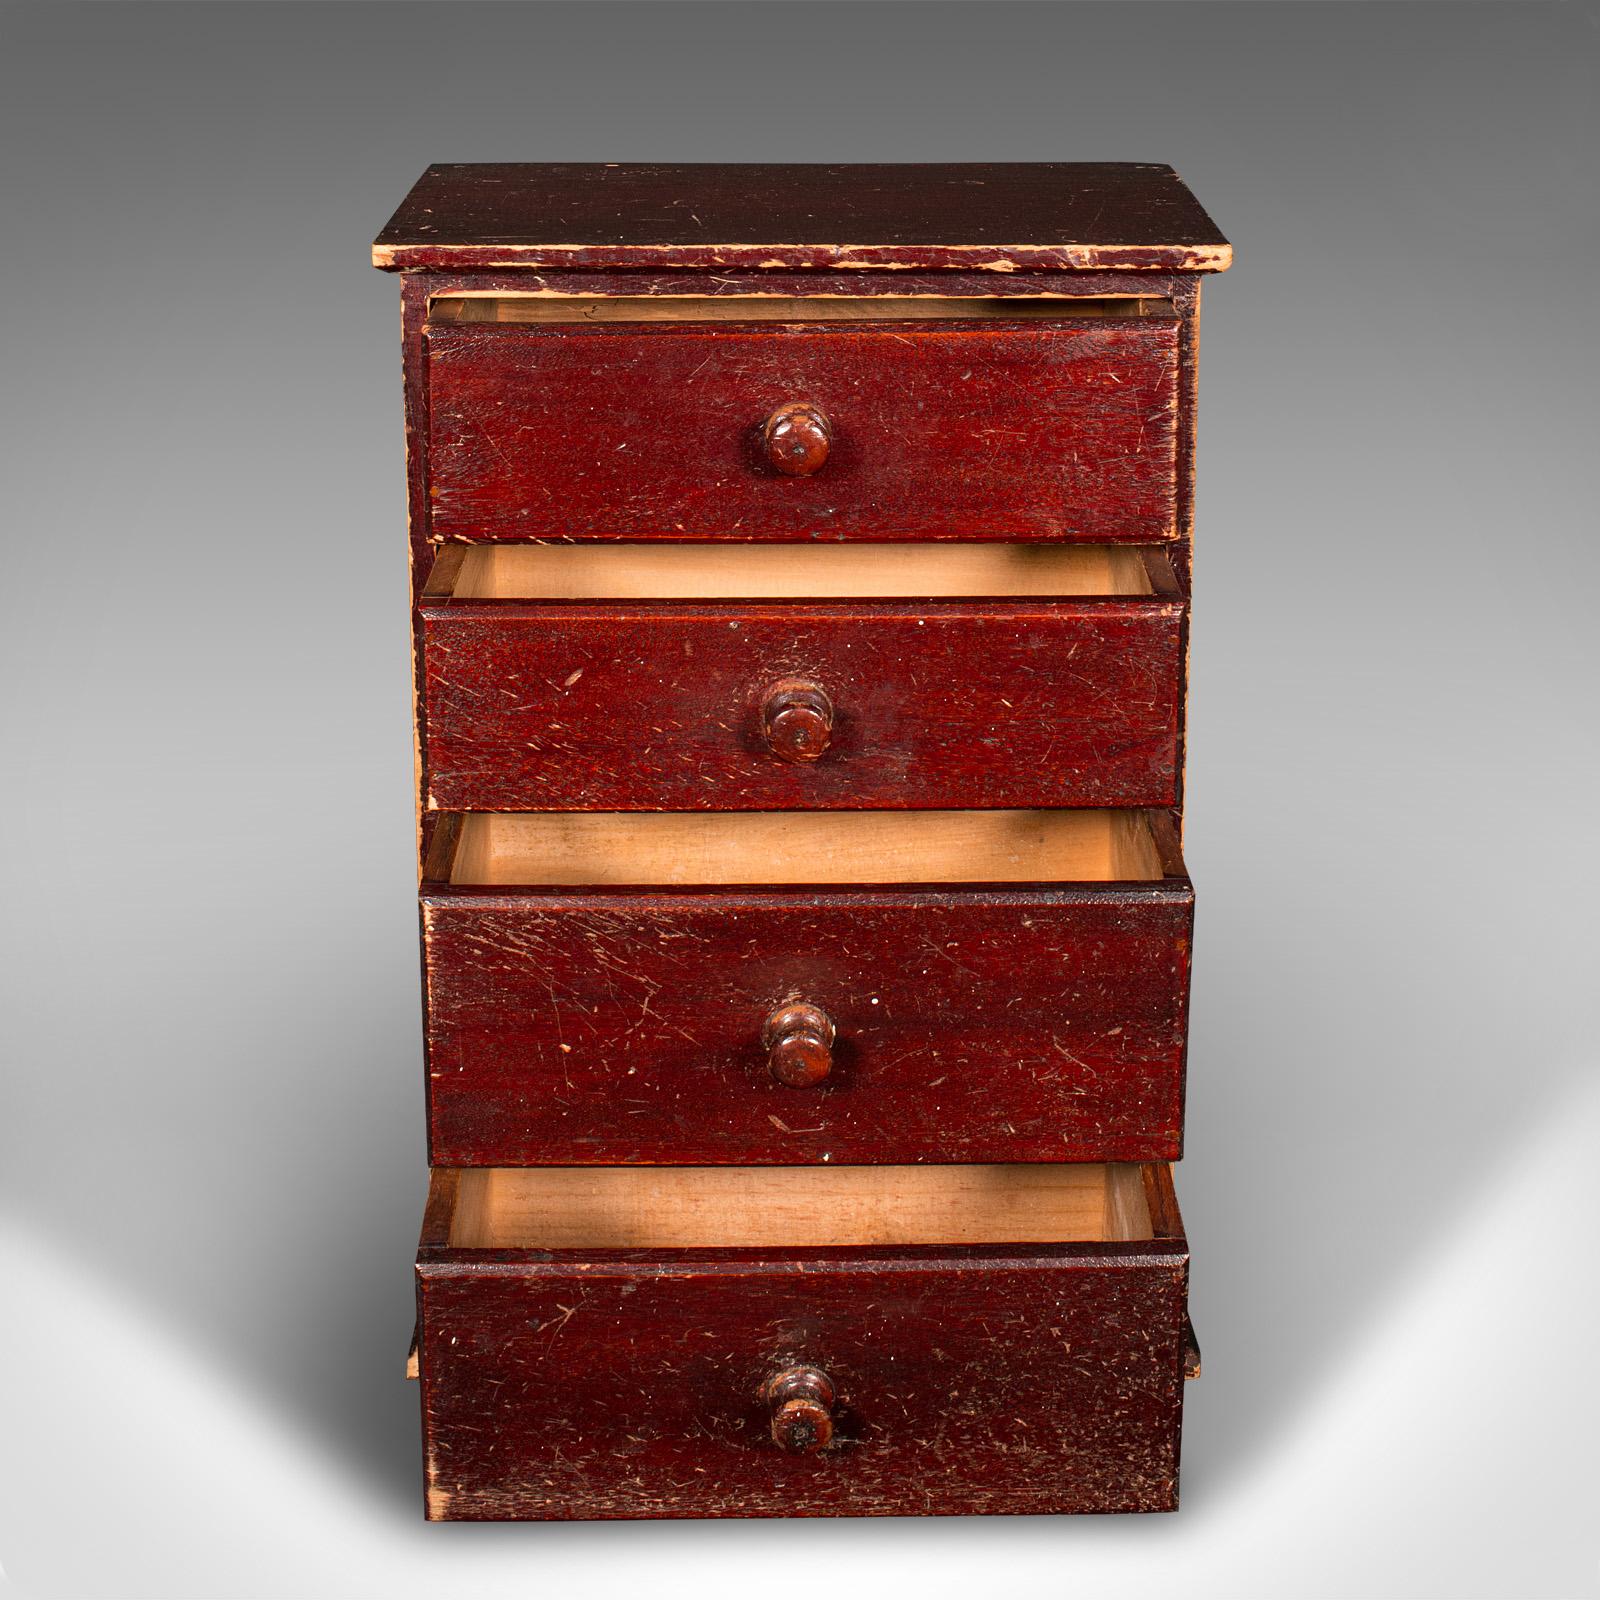 This is a small set of antique apothecary drawers. An English, stained pine countertop chest, dating to the Edwardian period, circa 1910.

Of small stature, ideal for retail merchandise or small collectibles
Displays a desirable aged patina and good